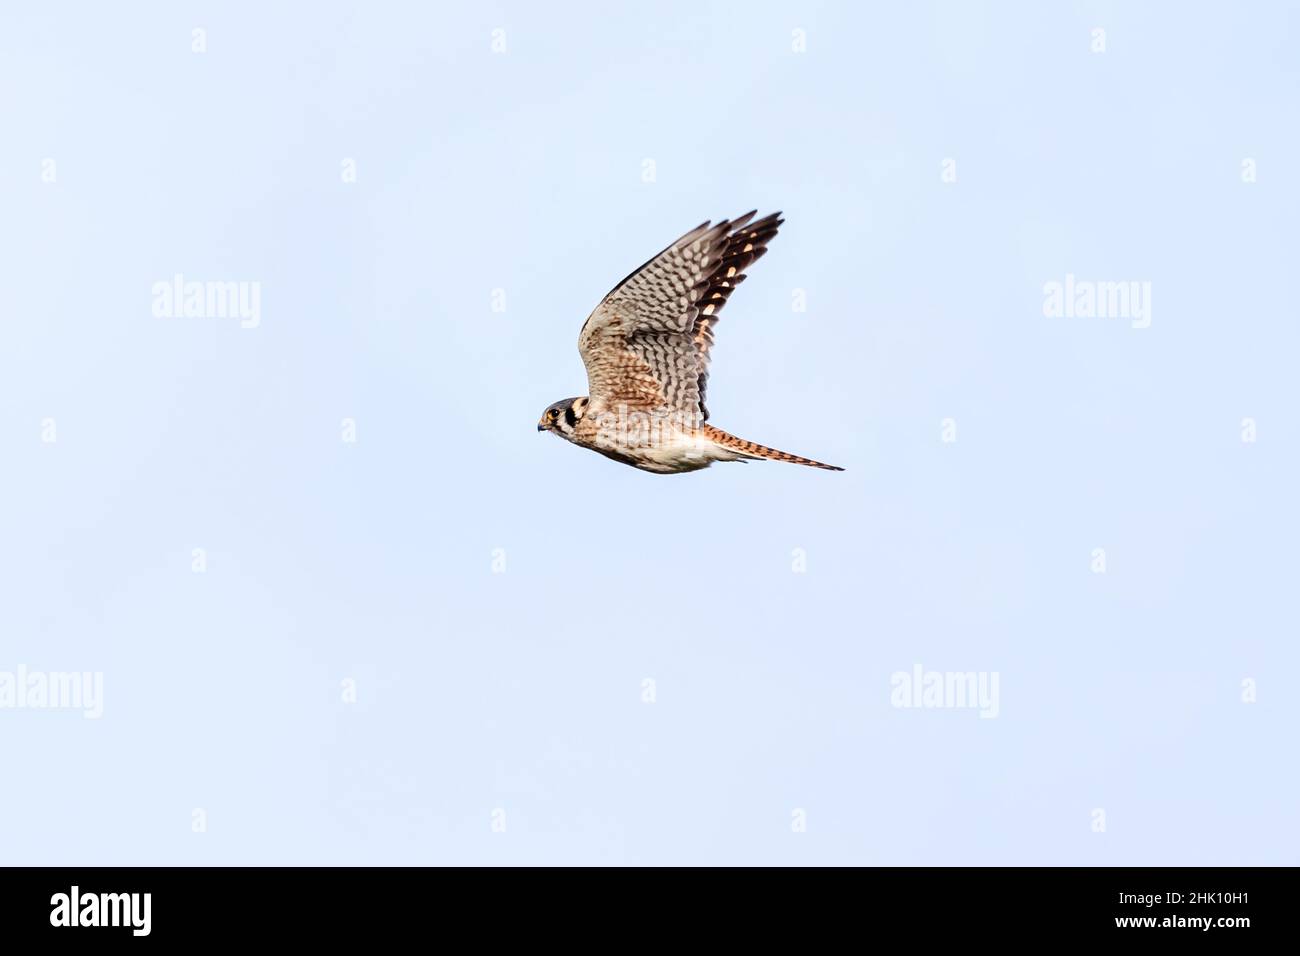 A female American Kestrel with upturned wings flying across the sky. Stock Photo